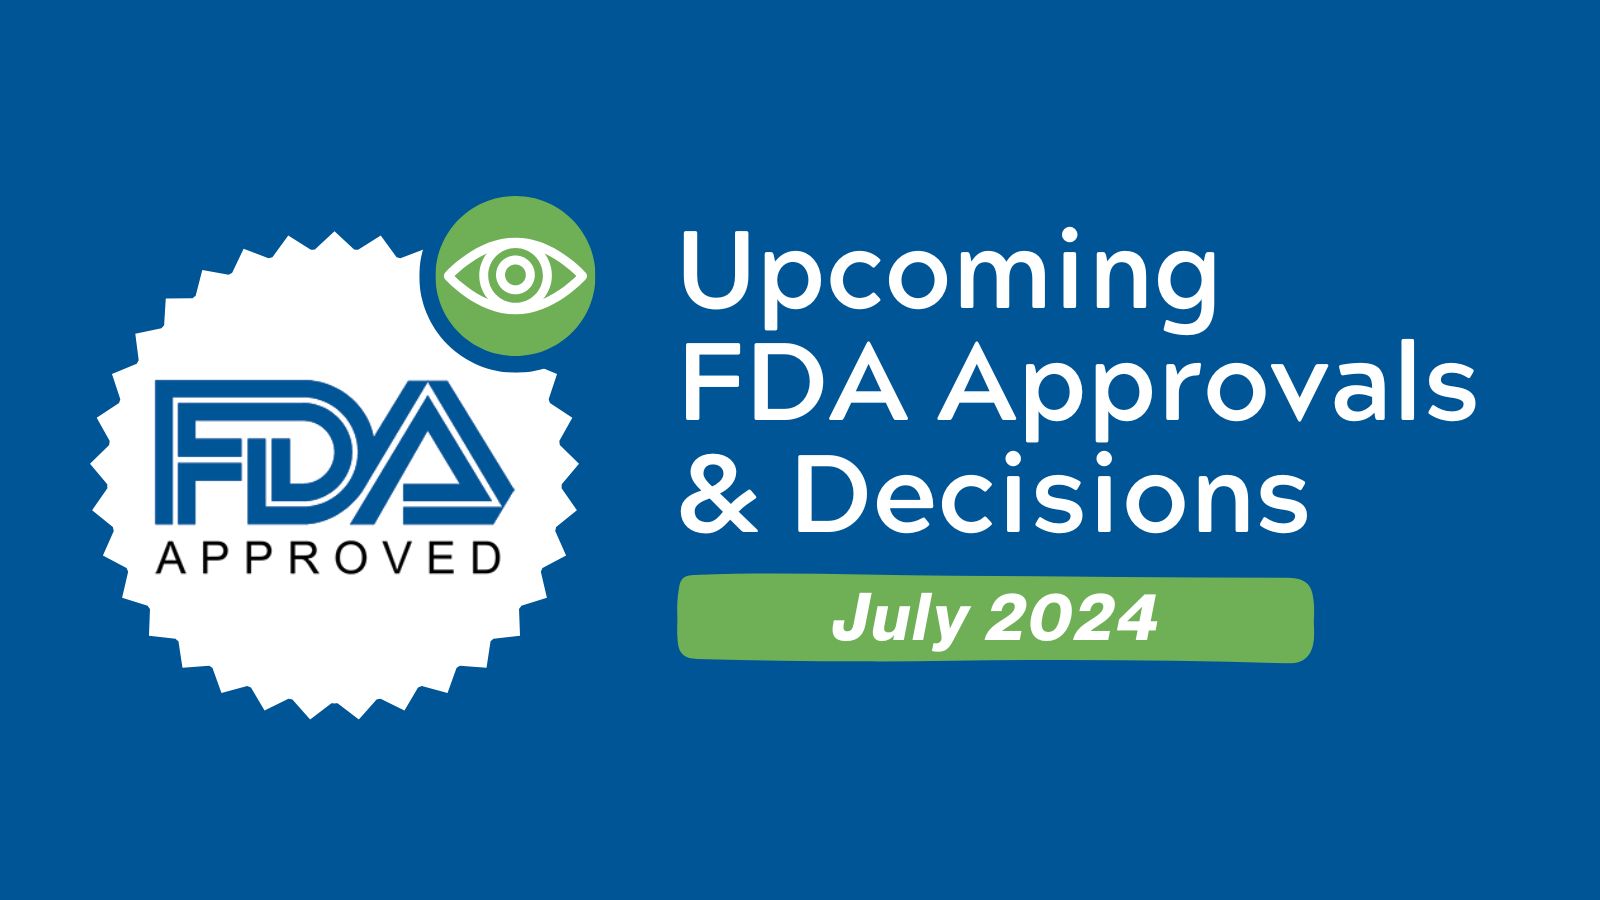 Upcoming FDA Approvals & Decisions - July 2024